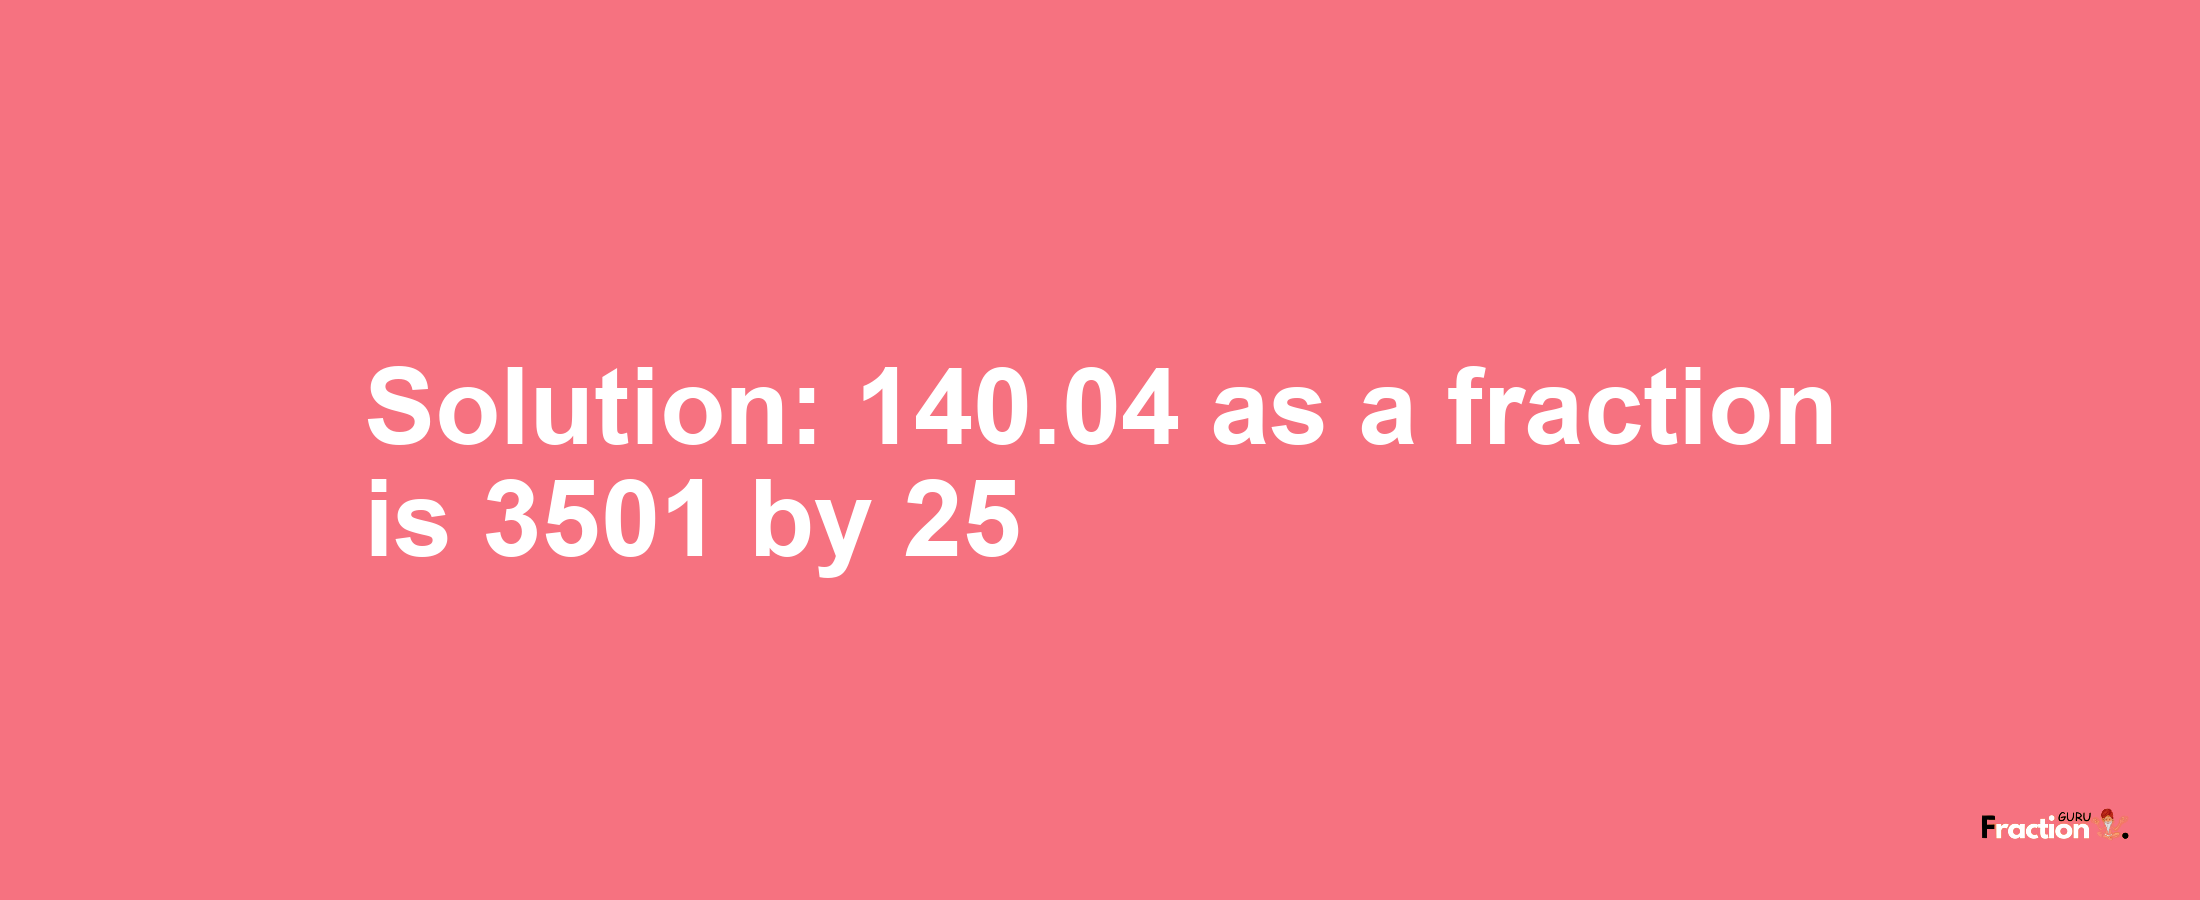 Solution:140.04 as a fraction is 3501/25